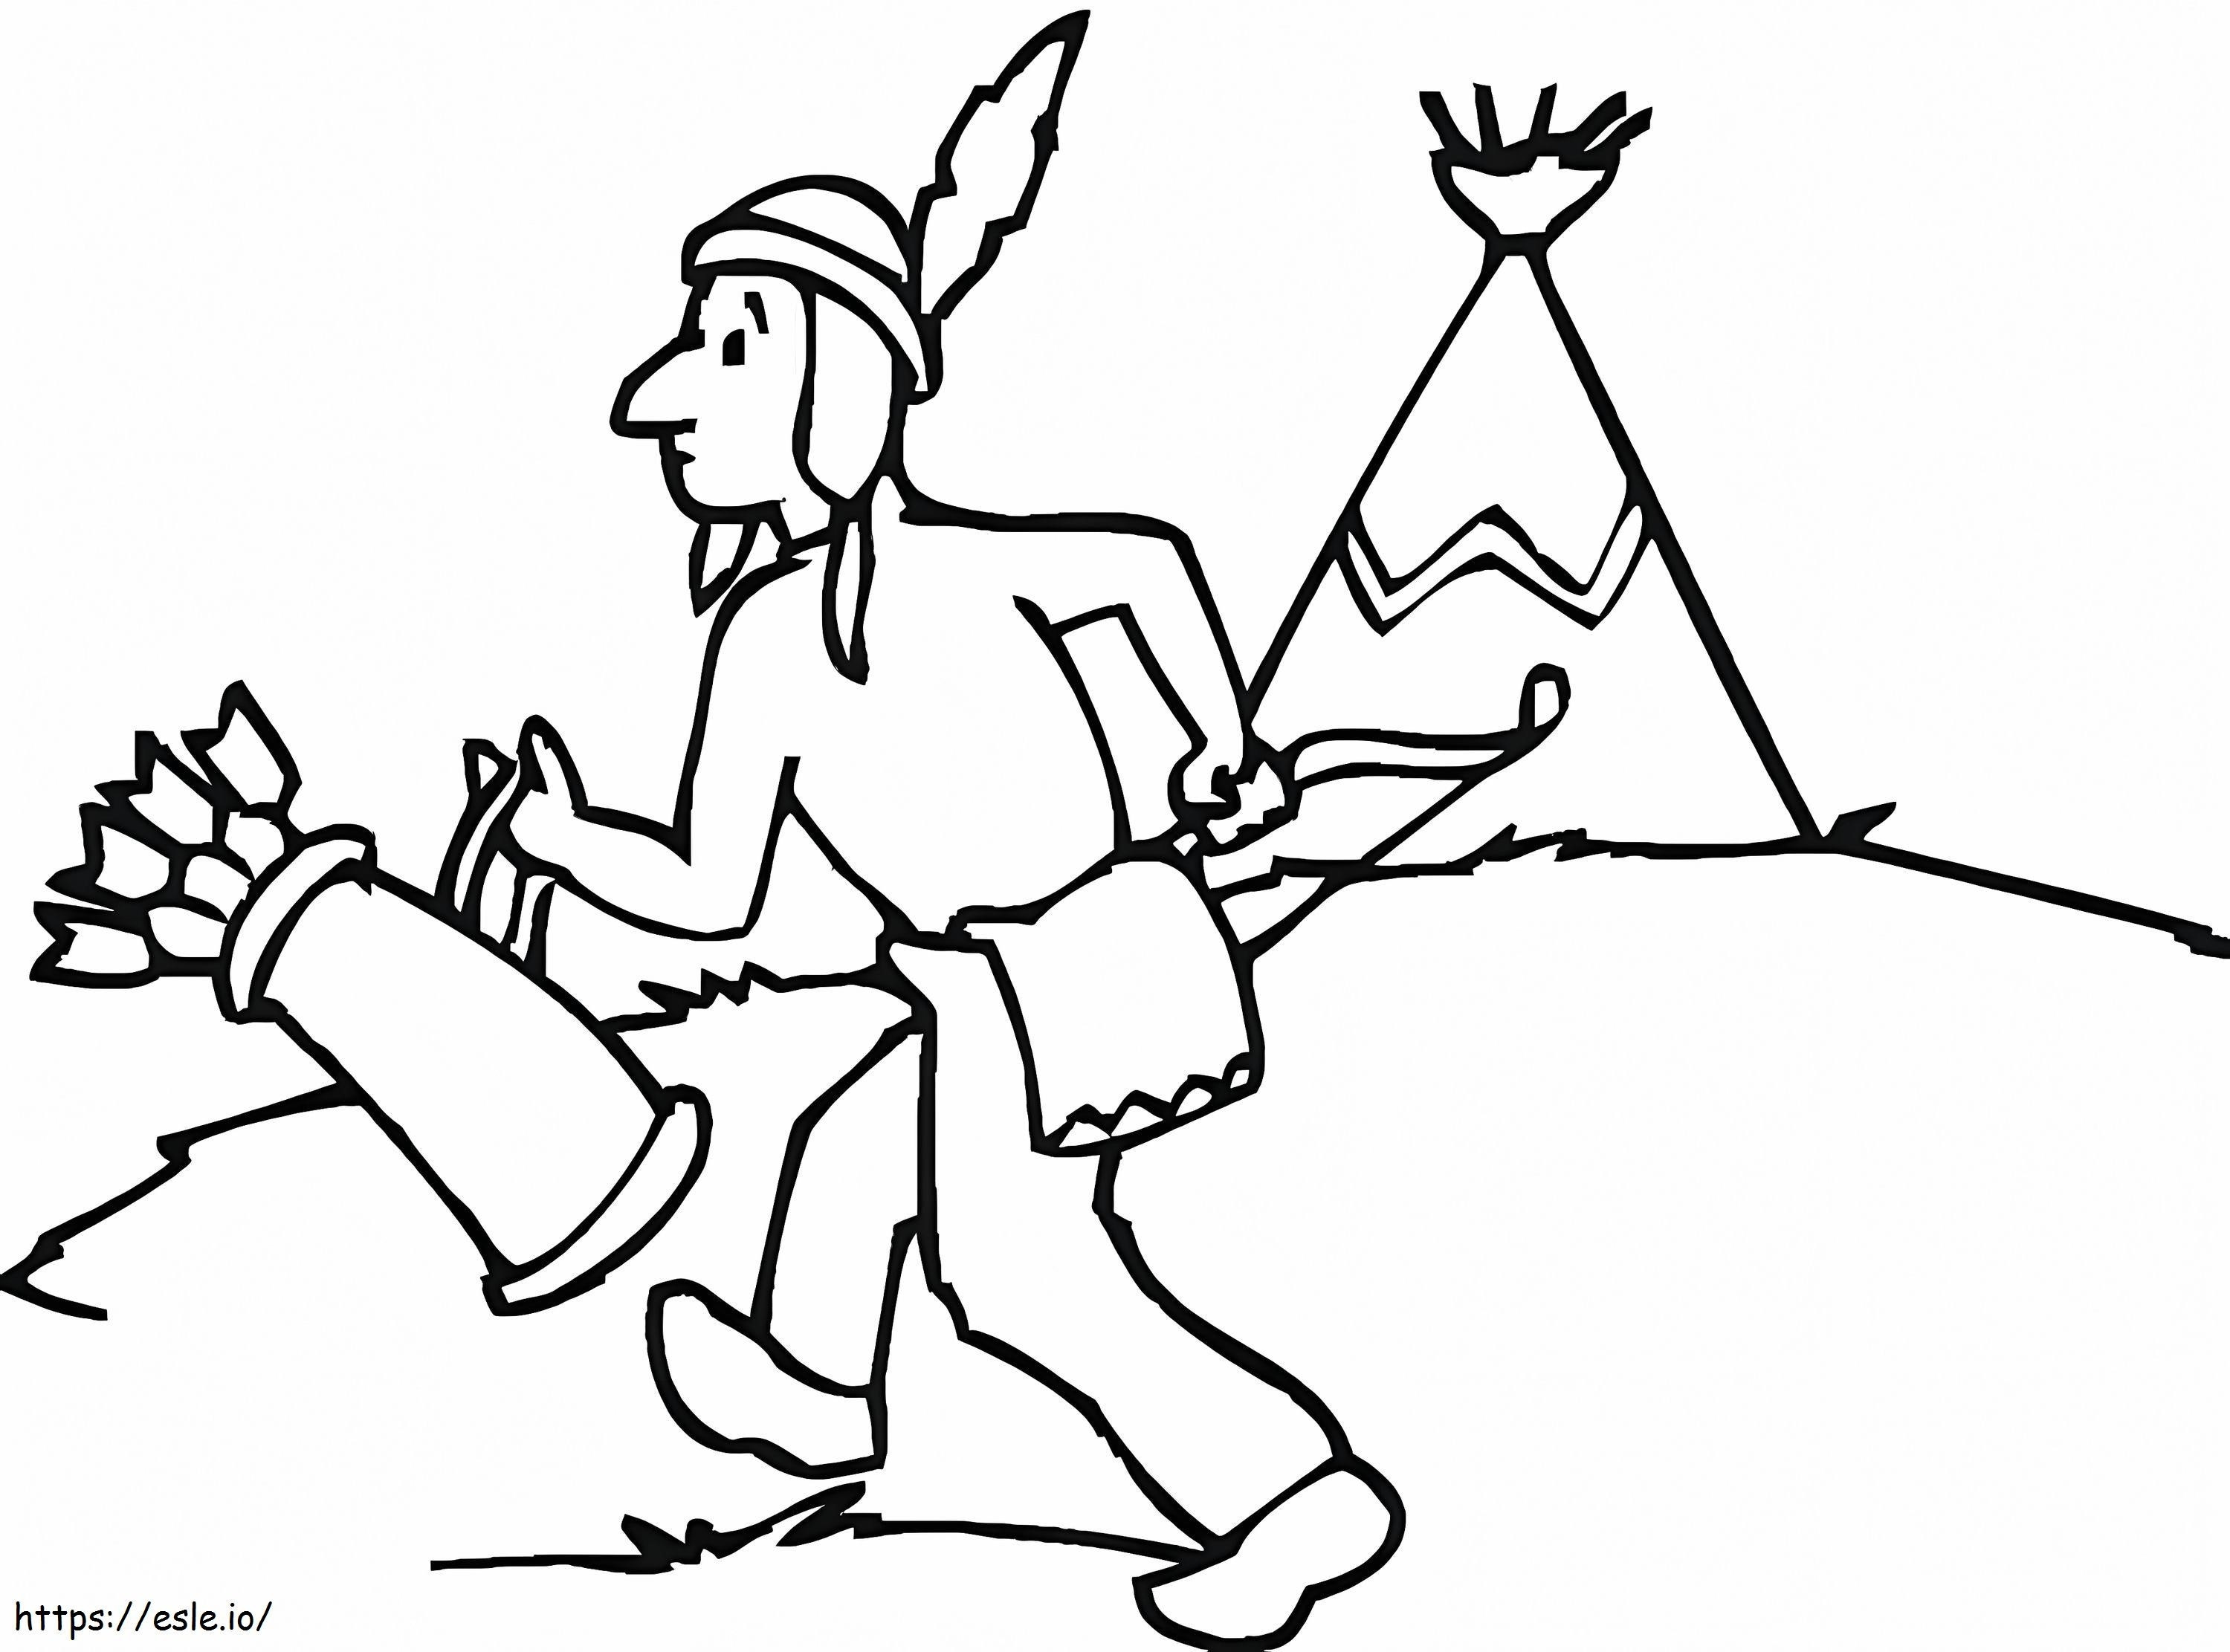 Native American Hunter 1 coloring page